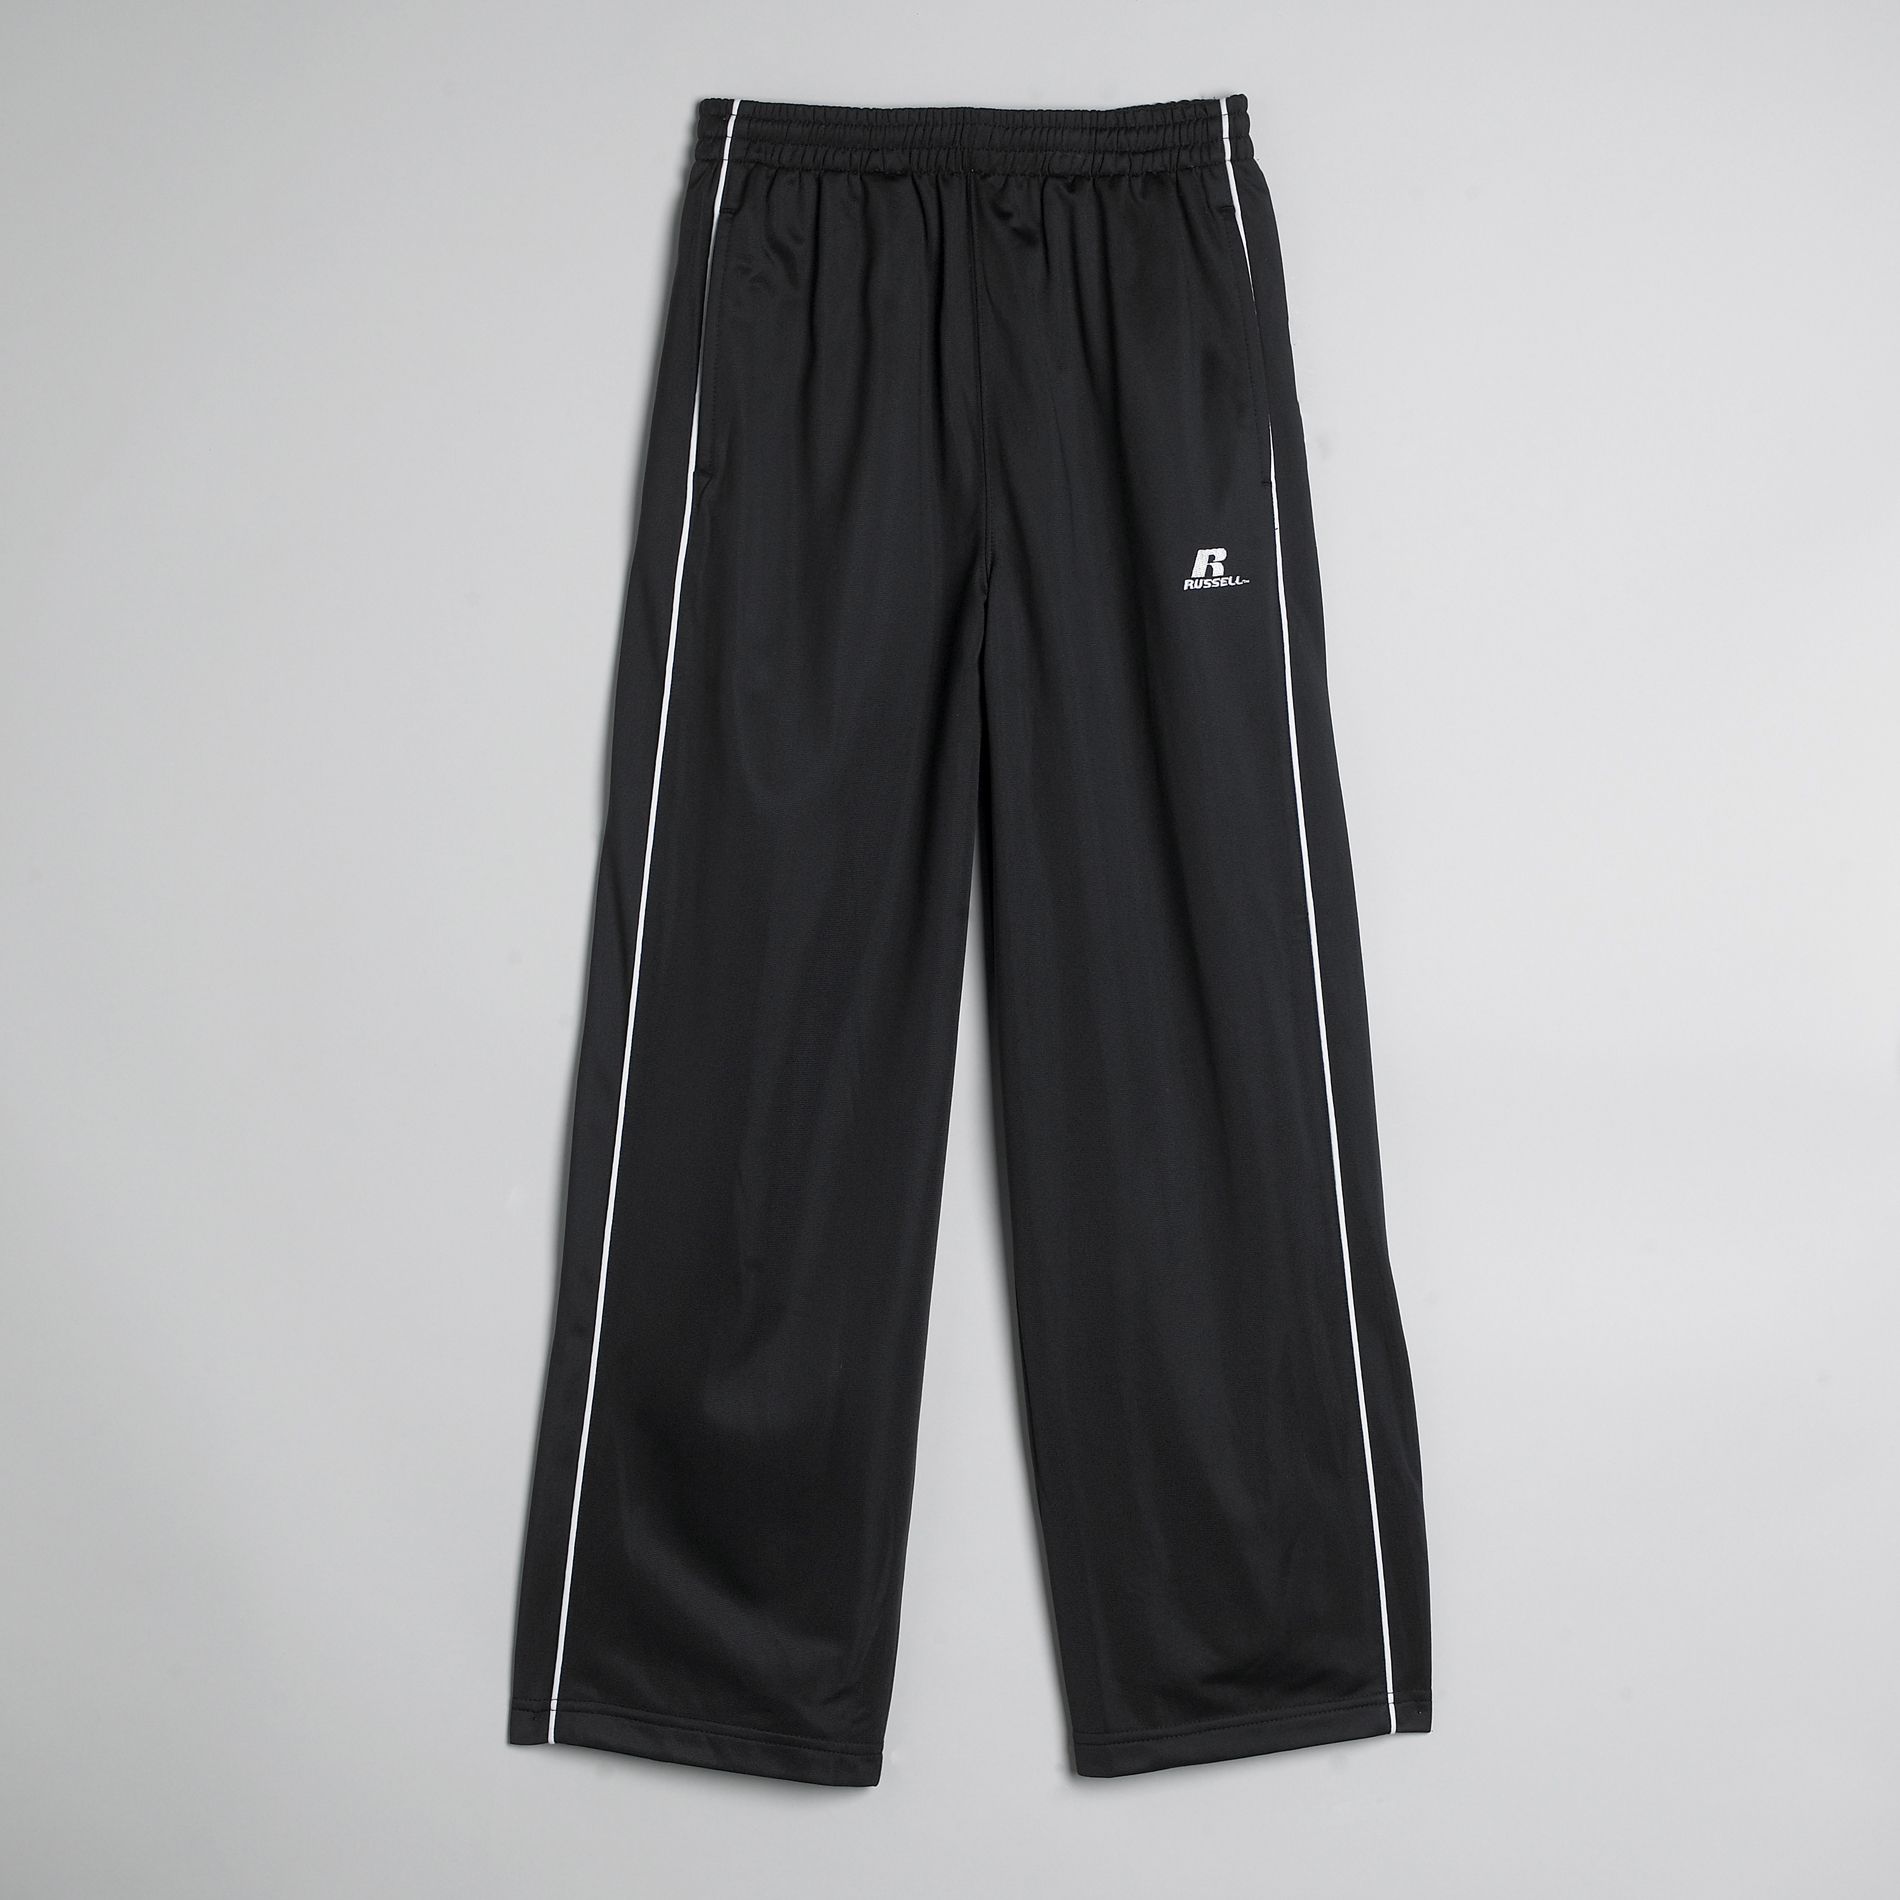 Russell Athletic Boy's Athletic Pants